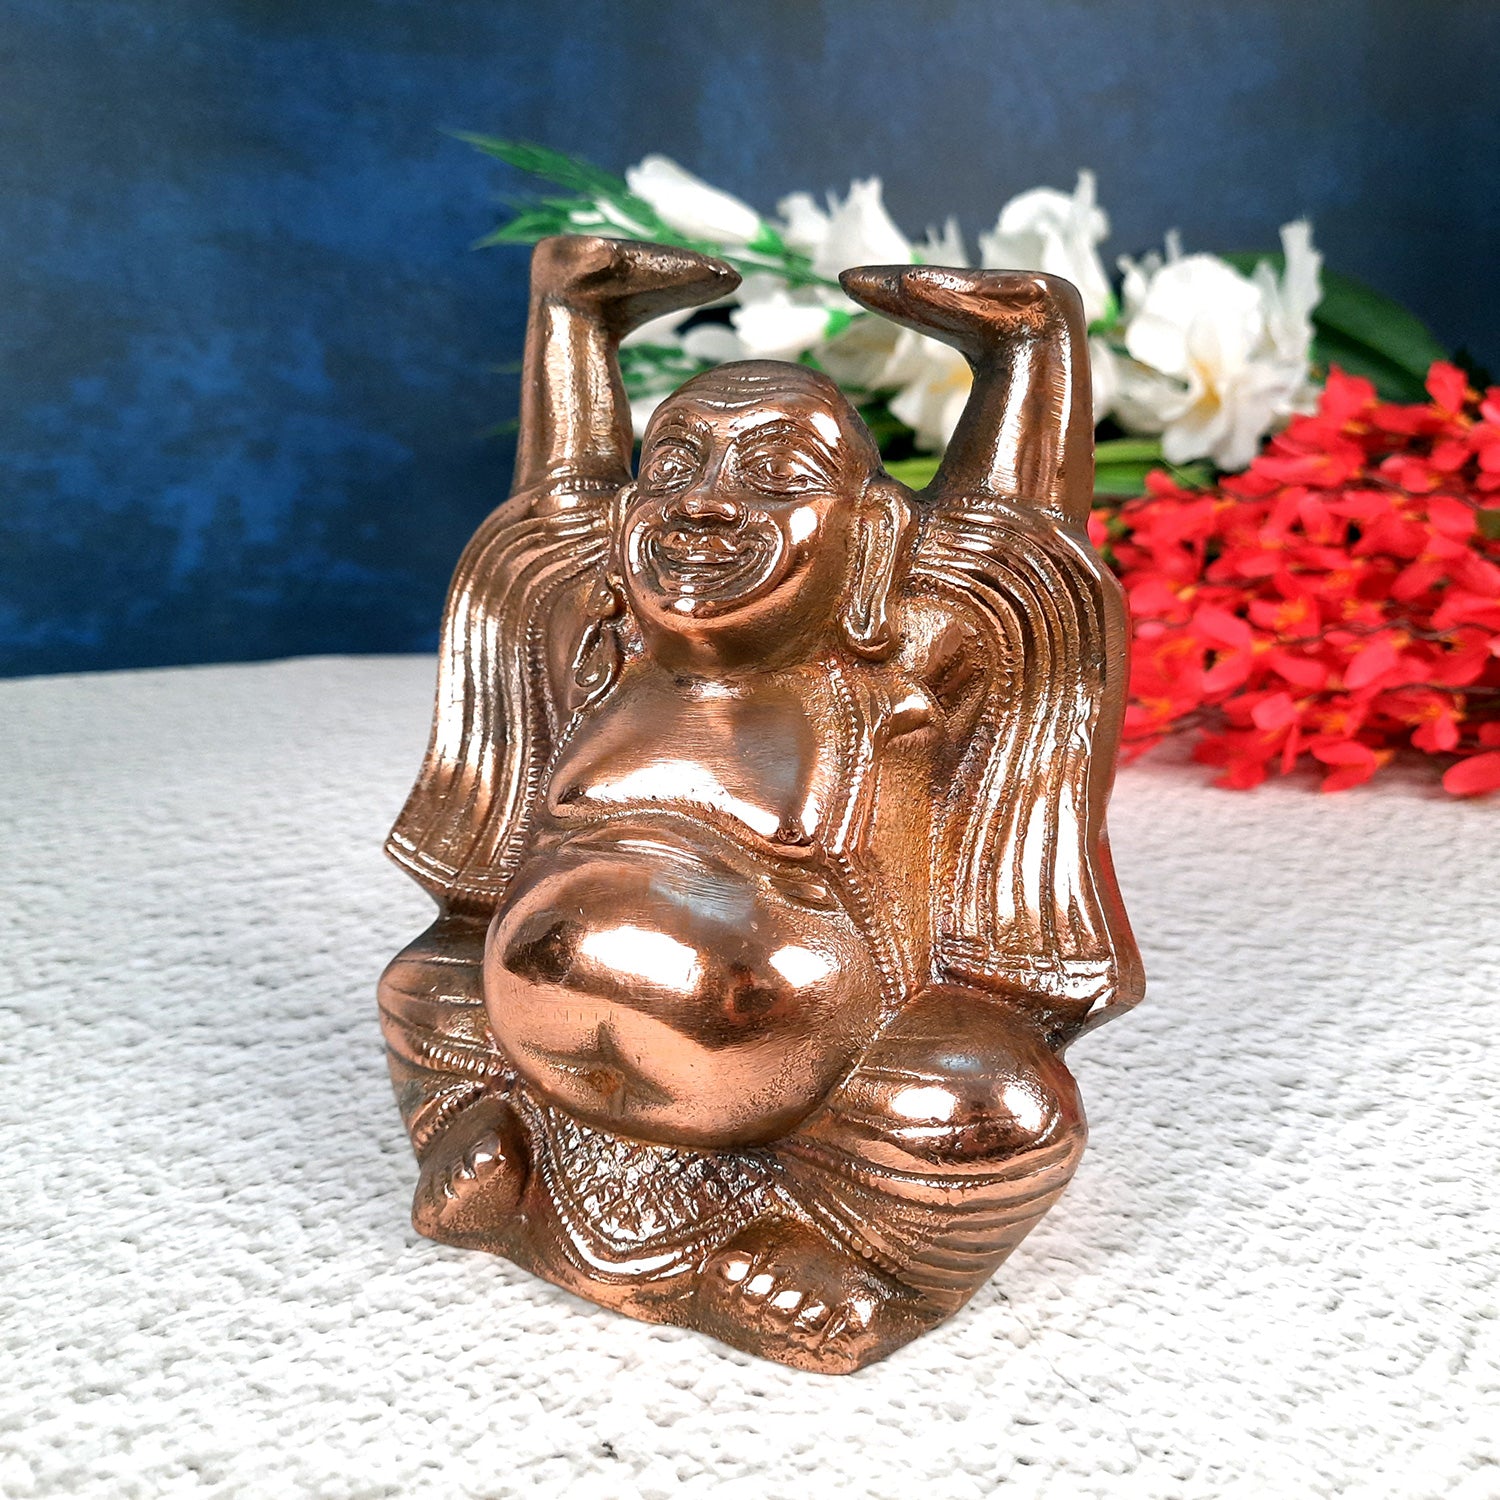 Hand Carved Chinese Style Little Monk Wood And Resin Sculpture Perfect Home  Decor And Gift For Small Buddha Statue Enthusiasts 210414 From Luo09,  $10.31 | DHgate.Com